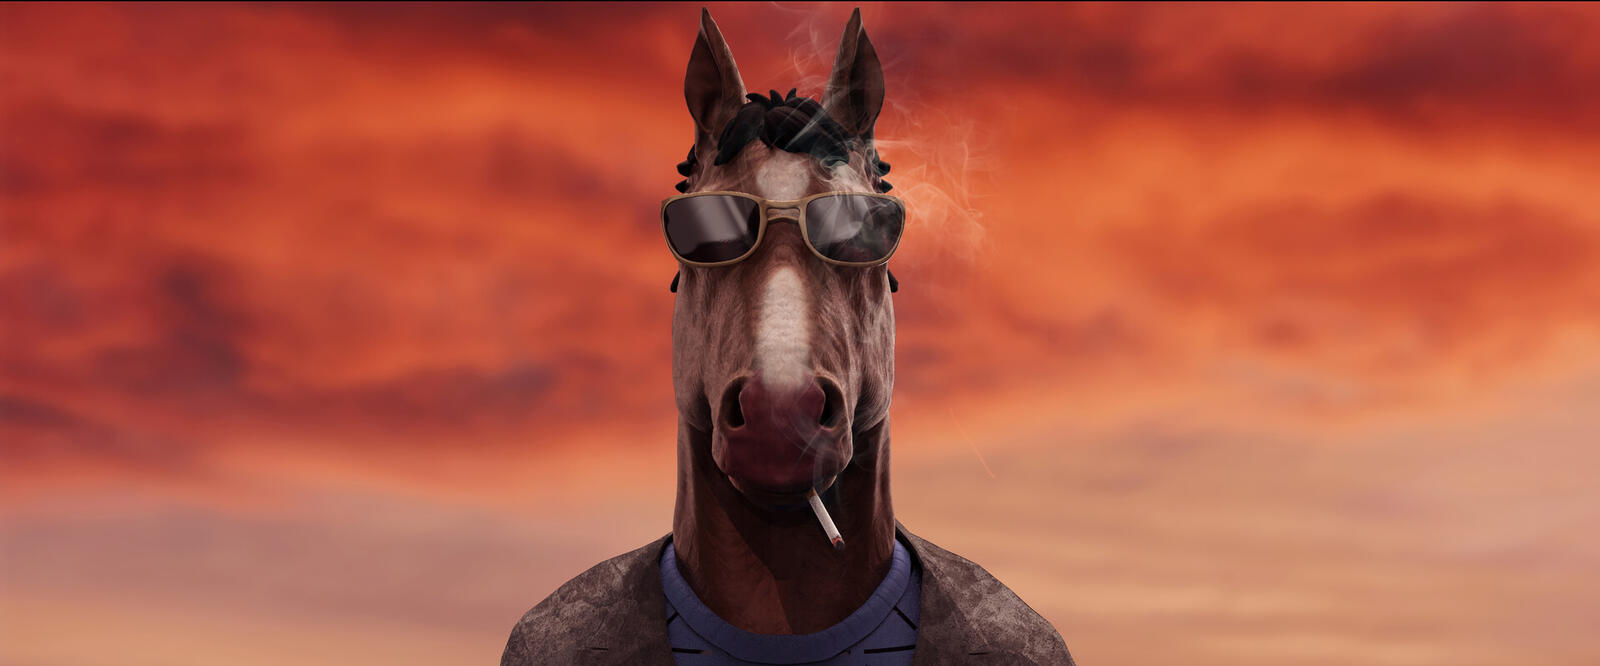 Free photo Brutal horse with glasses